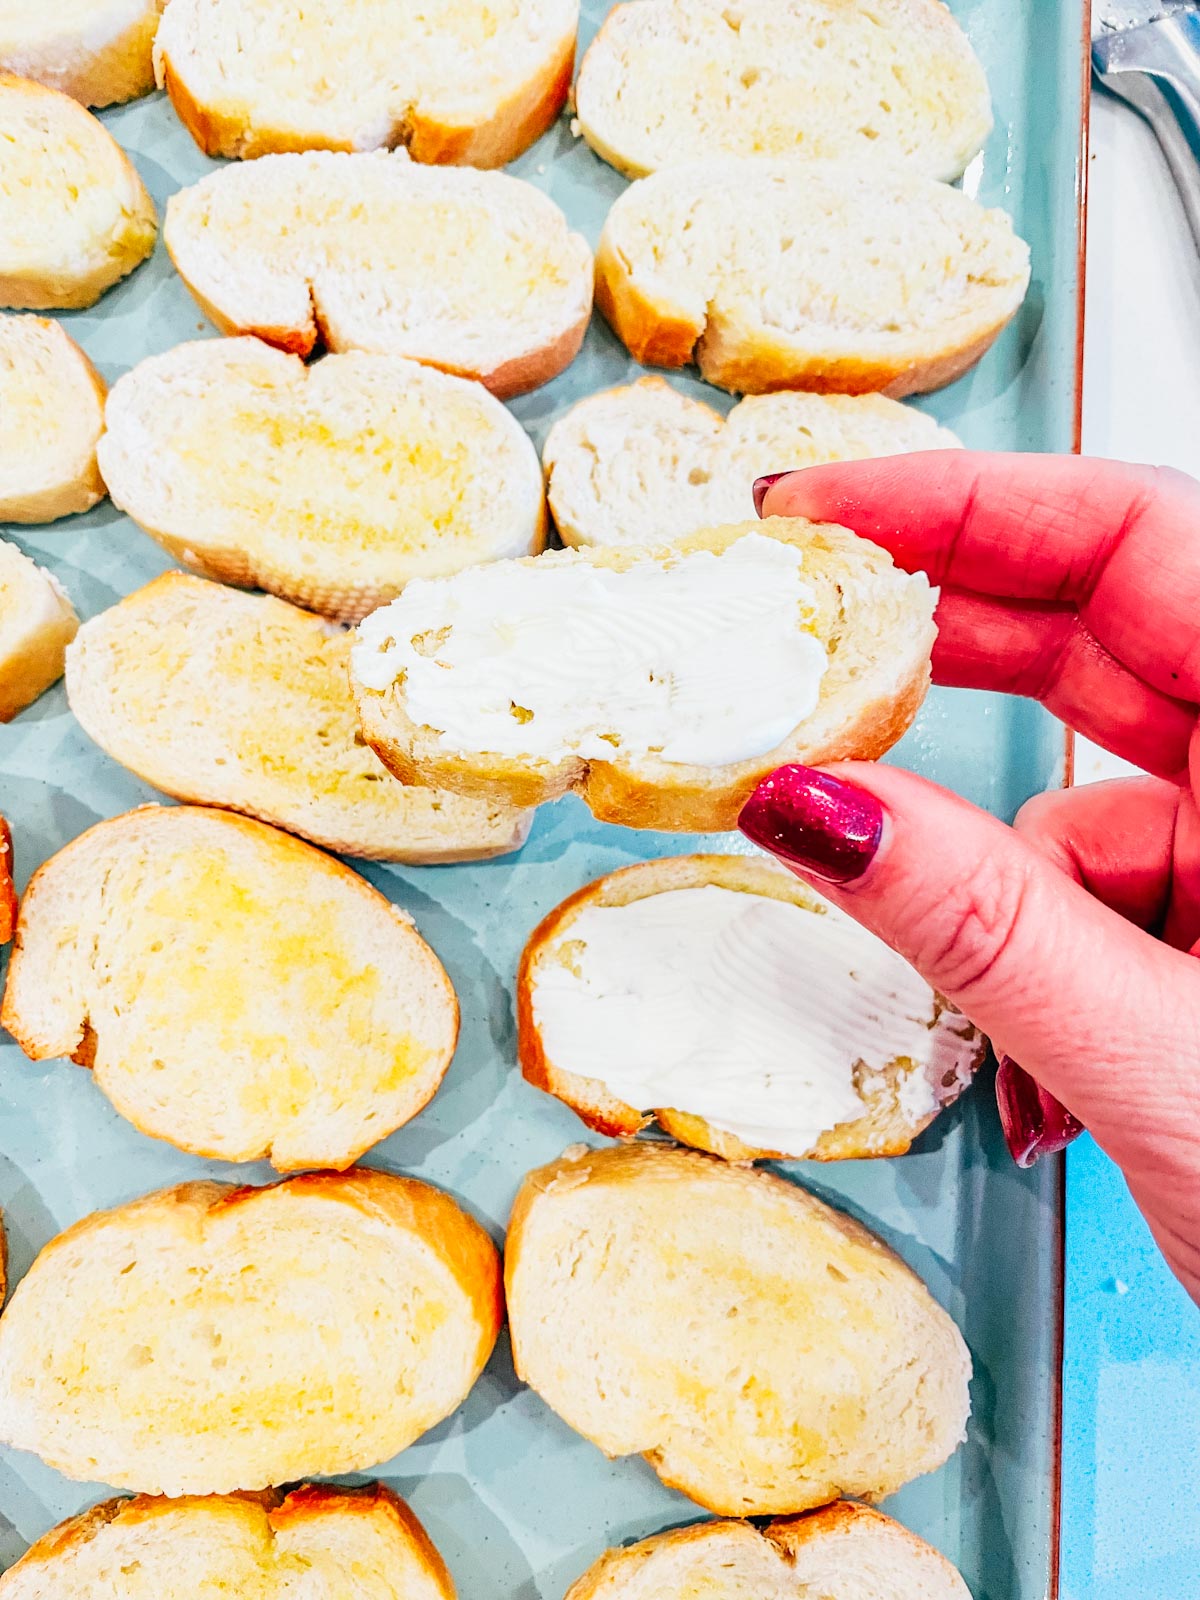 Spread a small amound of cream cheese on each crostini